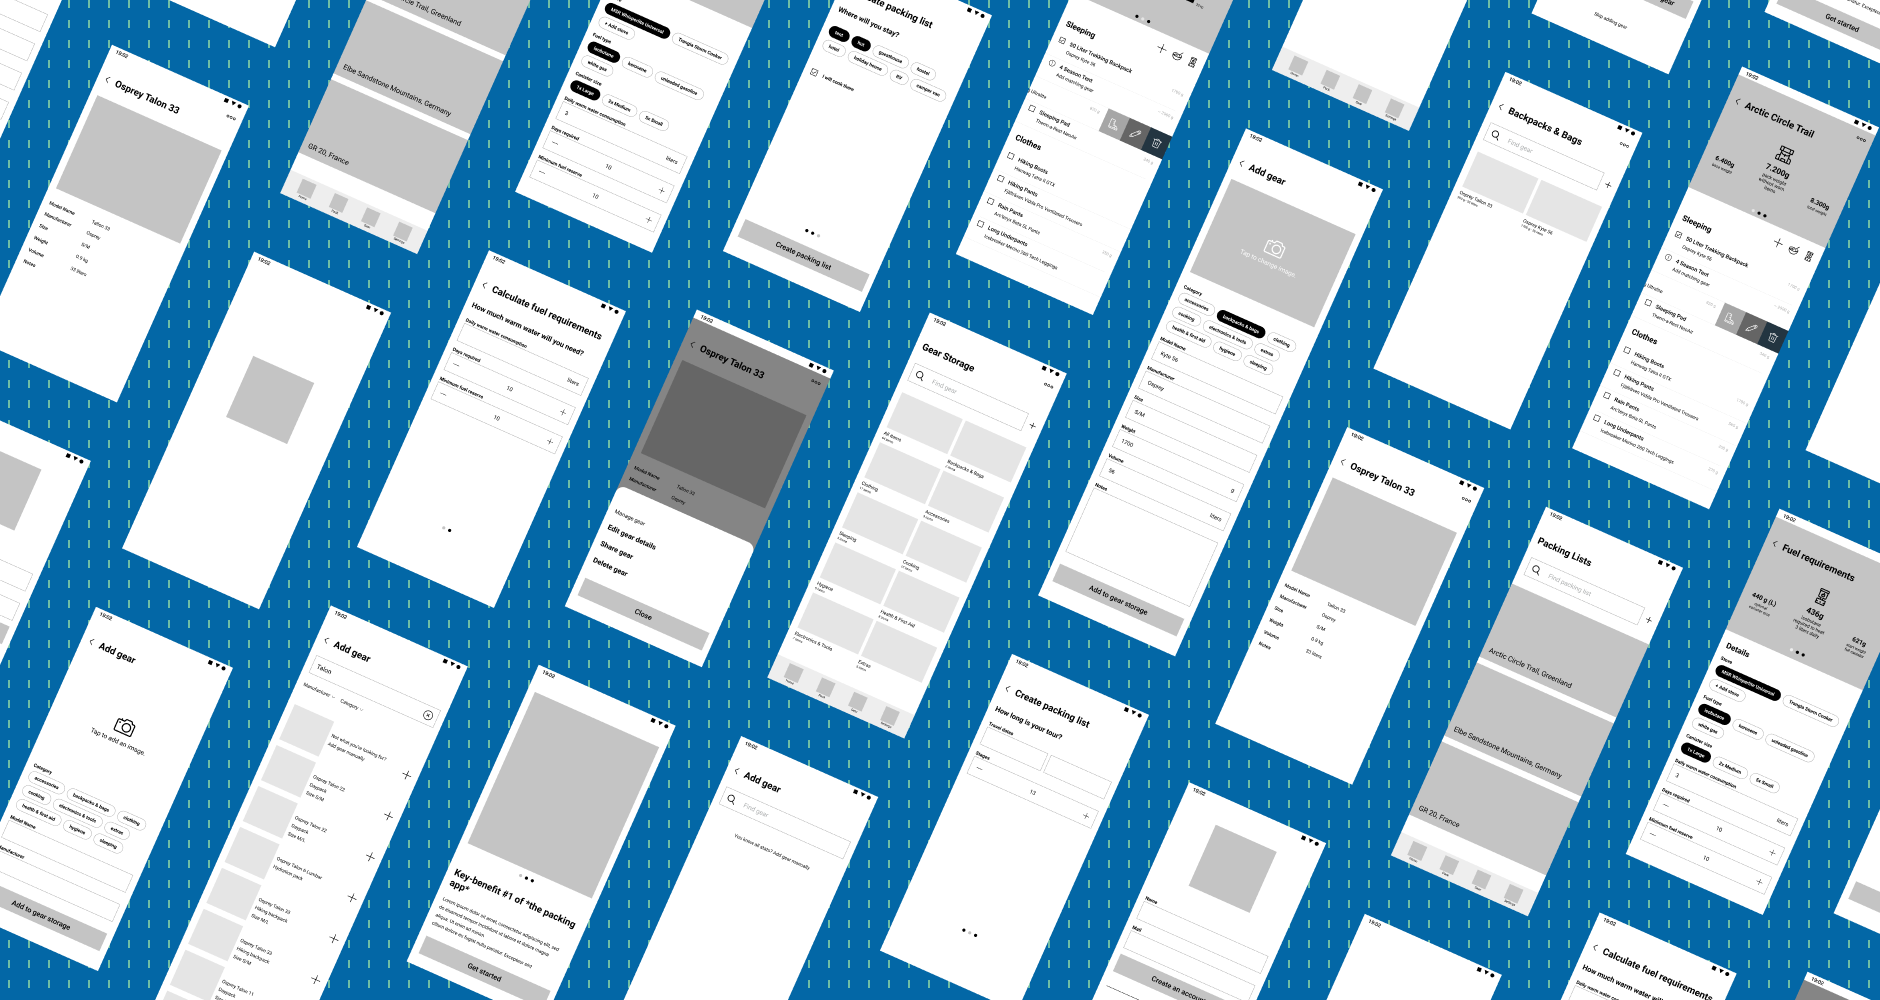 wireframes of the roofoss app